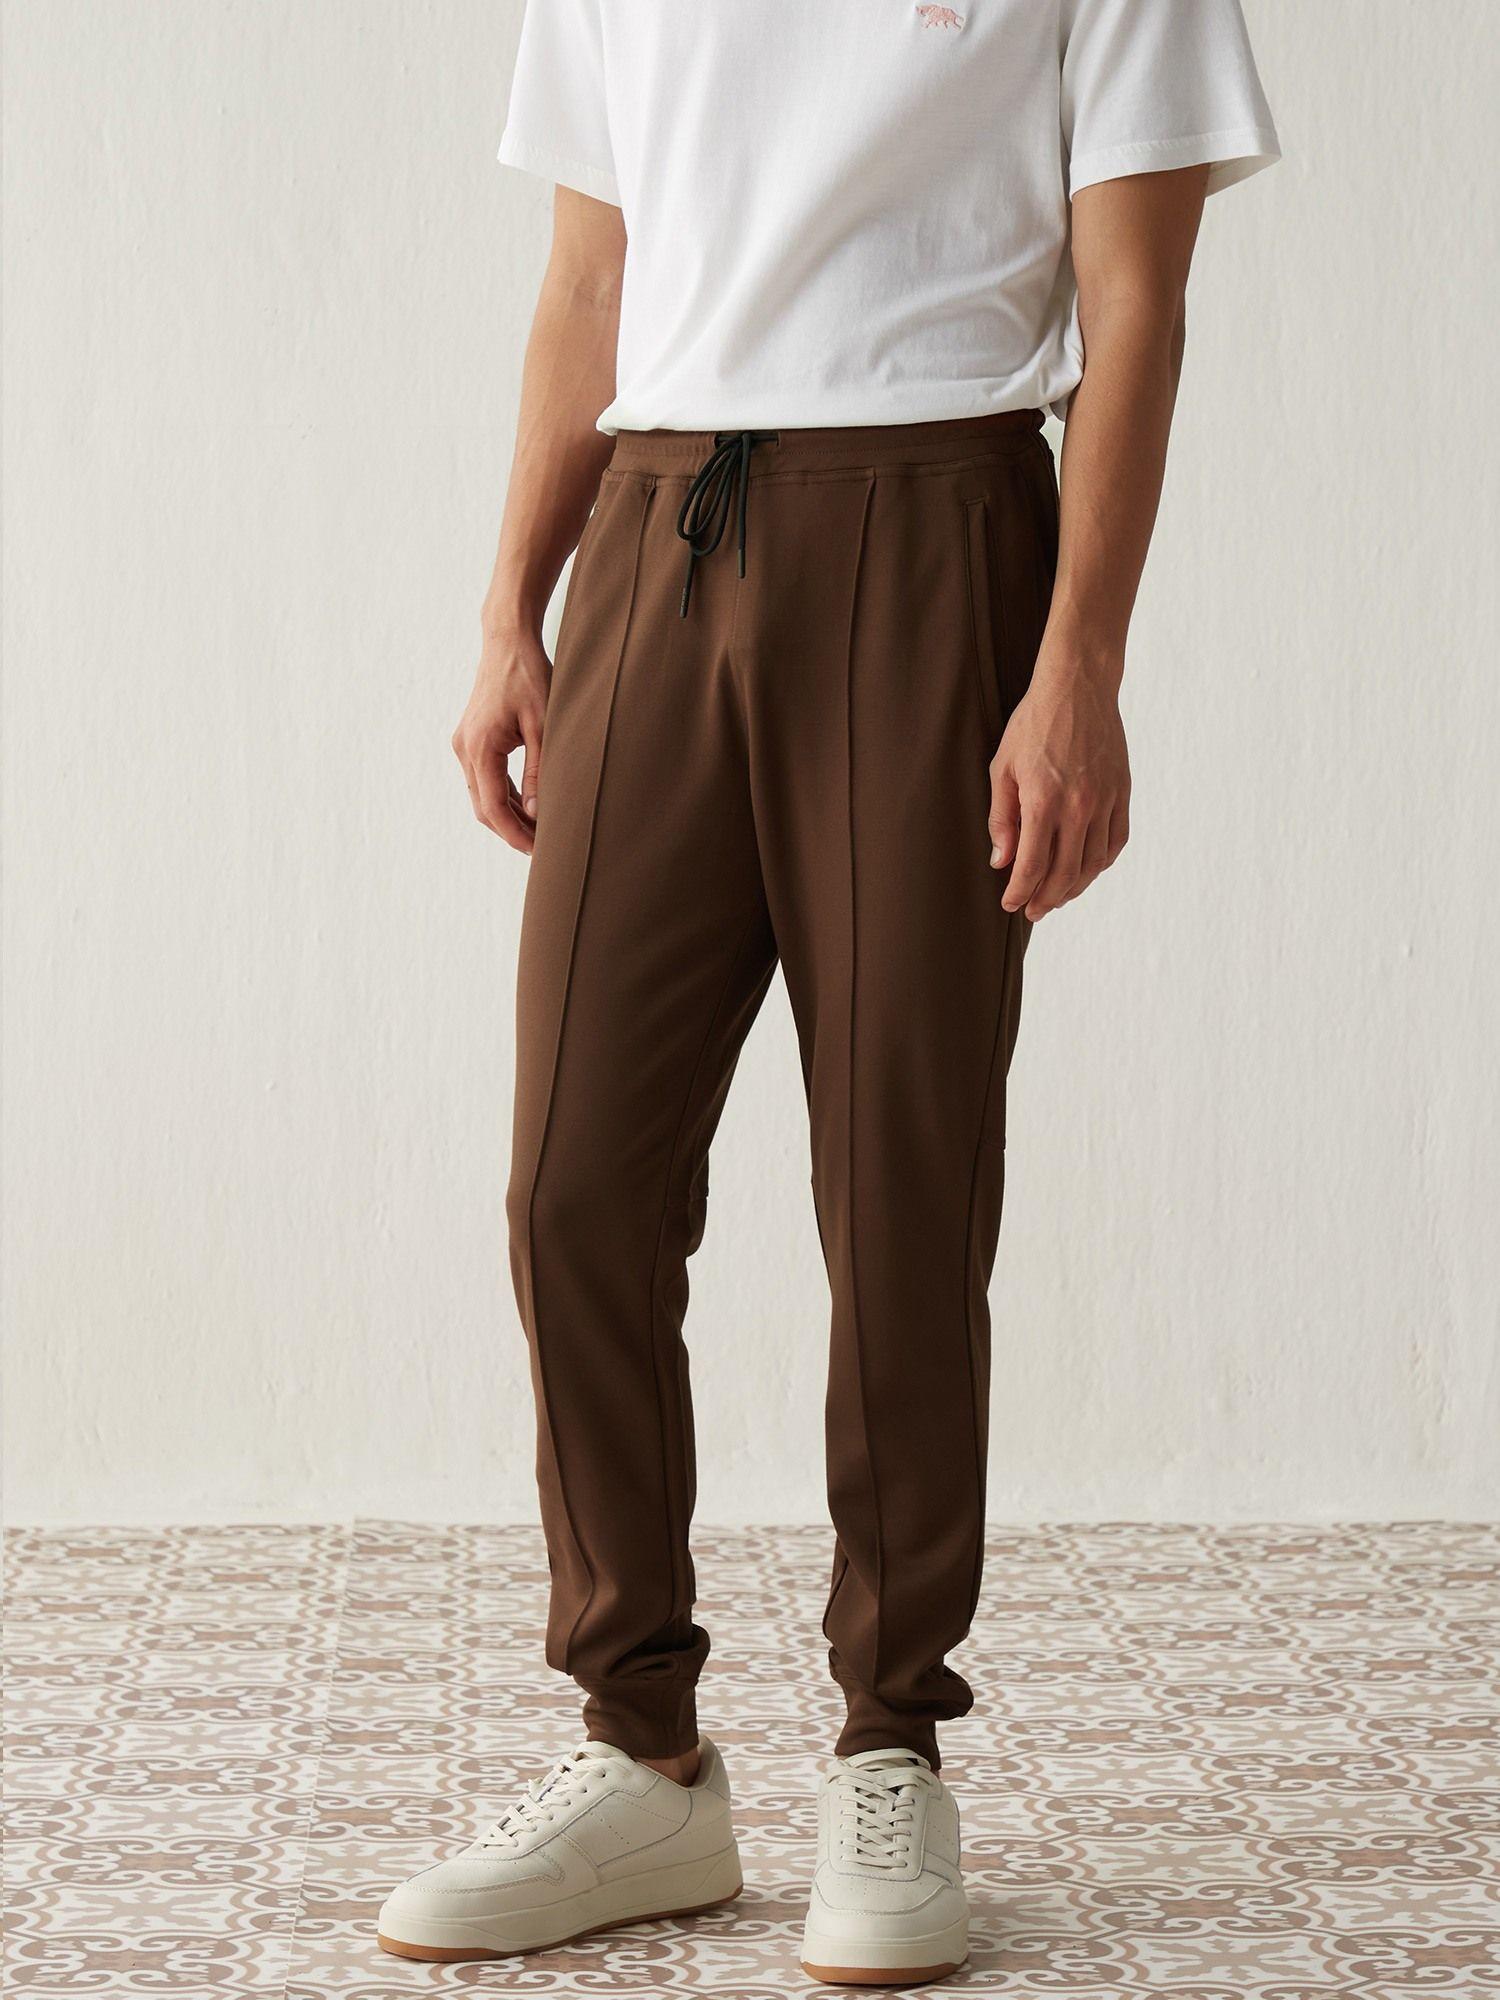 cocoa brown joggers